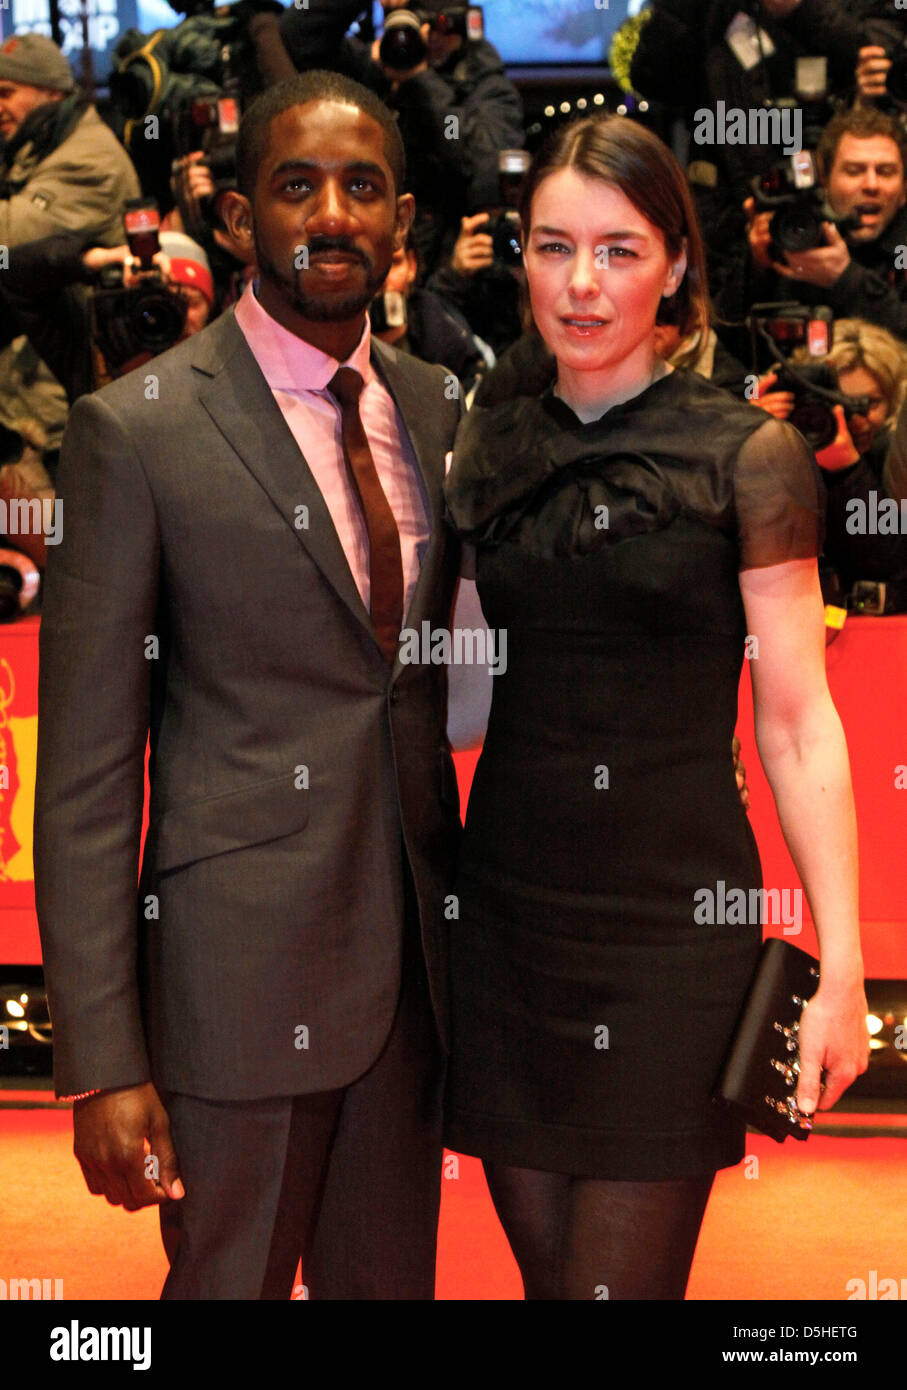 British actress Olivia Williams and her husband Rashan Stone arrive for the premiere of the film 'The Ghost Writer' during the 60th Berlinale International Film Festival in Berlin, Germany, 12 February 2010. The festival runs until 21 Febuary 2010. Photo: Hubert Boesl Stock Photo